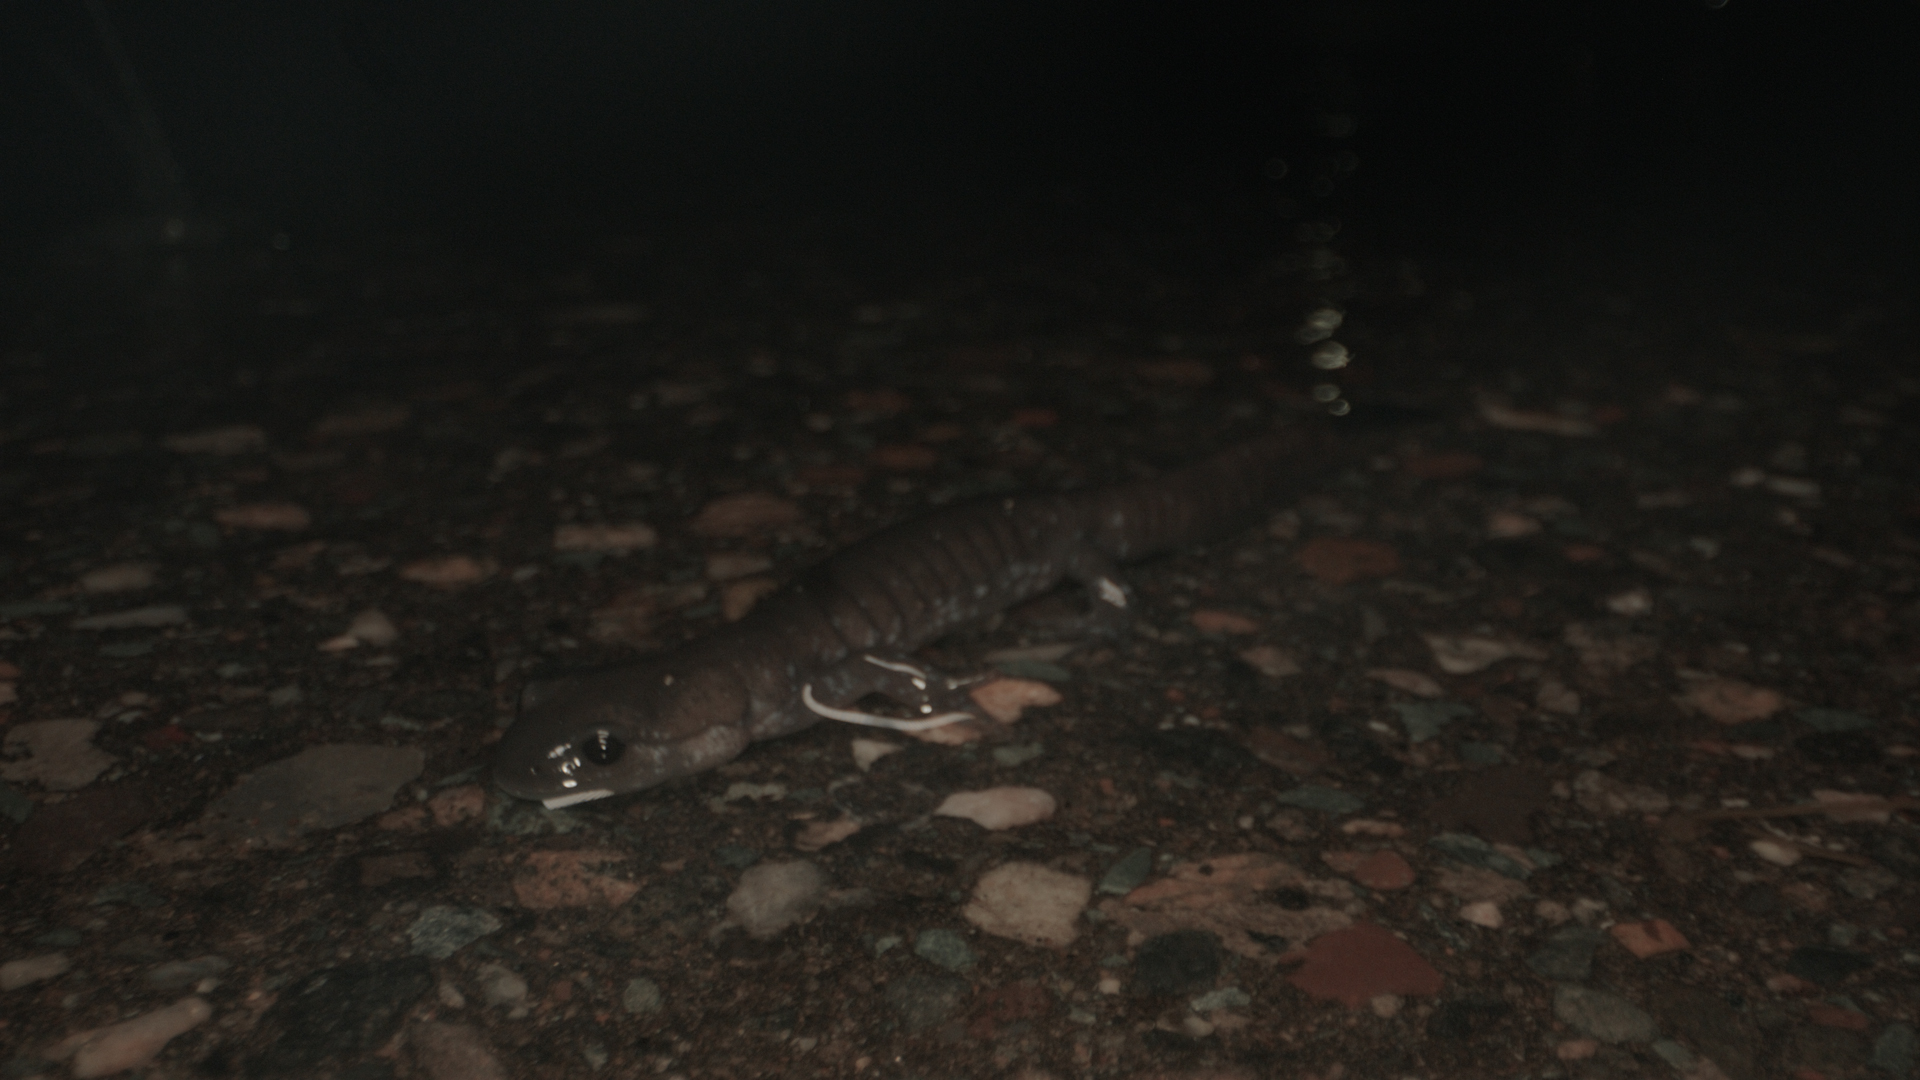 Salamander peeks out from the grass at night